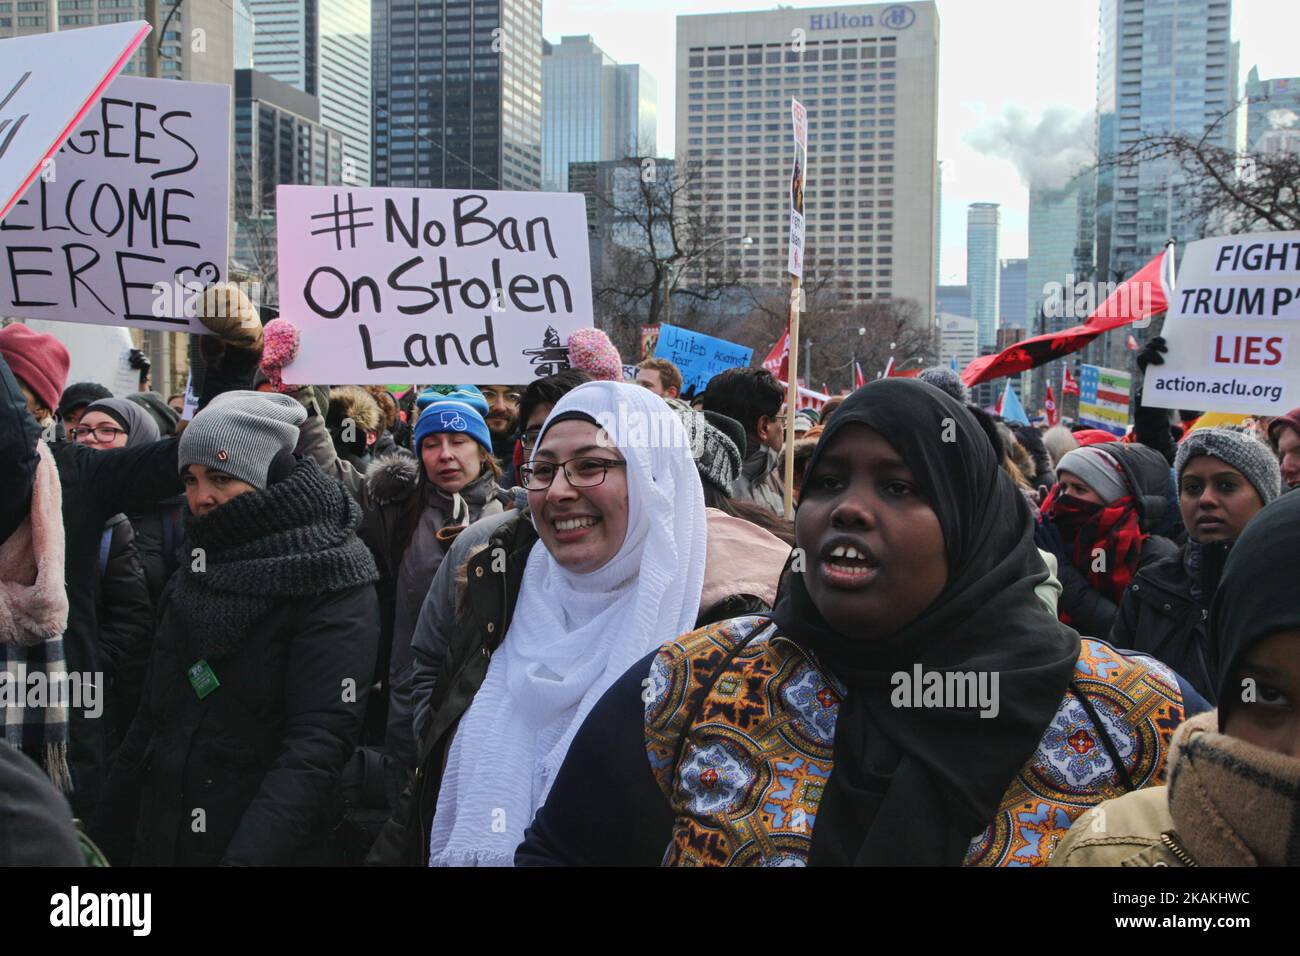 Muslims join thousands of Canadians in a massive protest against President Trump's travel ban on Muslims during the National Day of Action against Islamophobia and White Supremacy in downtown Toronto, Ontario, Canada, on February 04, 2017. Canadians joined countries around the world in protesting against American President Donald Trump's executive order, banning citizens of seven majority Muslim countries (Iran, Iraq, Sudan, Somalia, Syria, Yemen and Libya) from entering the United States for the next three months and banning Syrian refugees from indefinitely entering America. (Photo by Creati Stock Photo